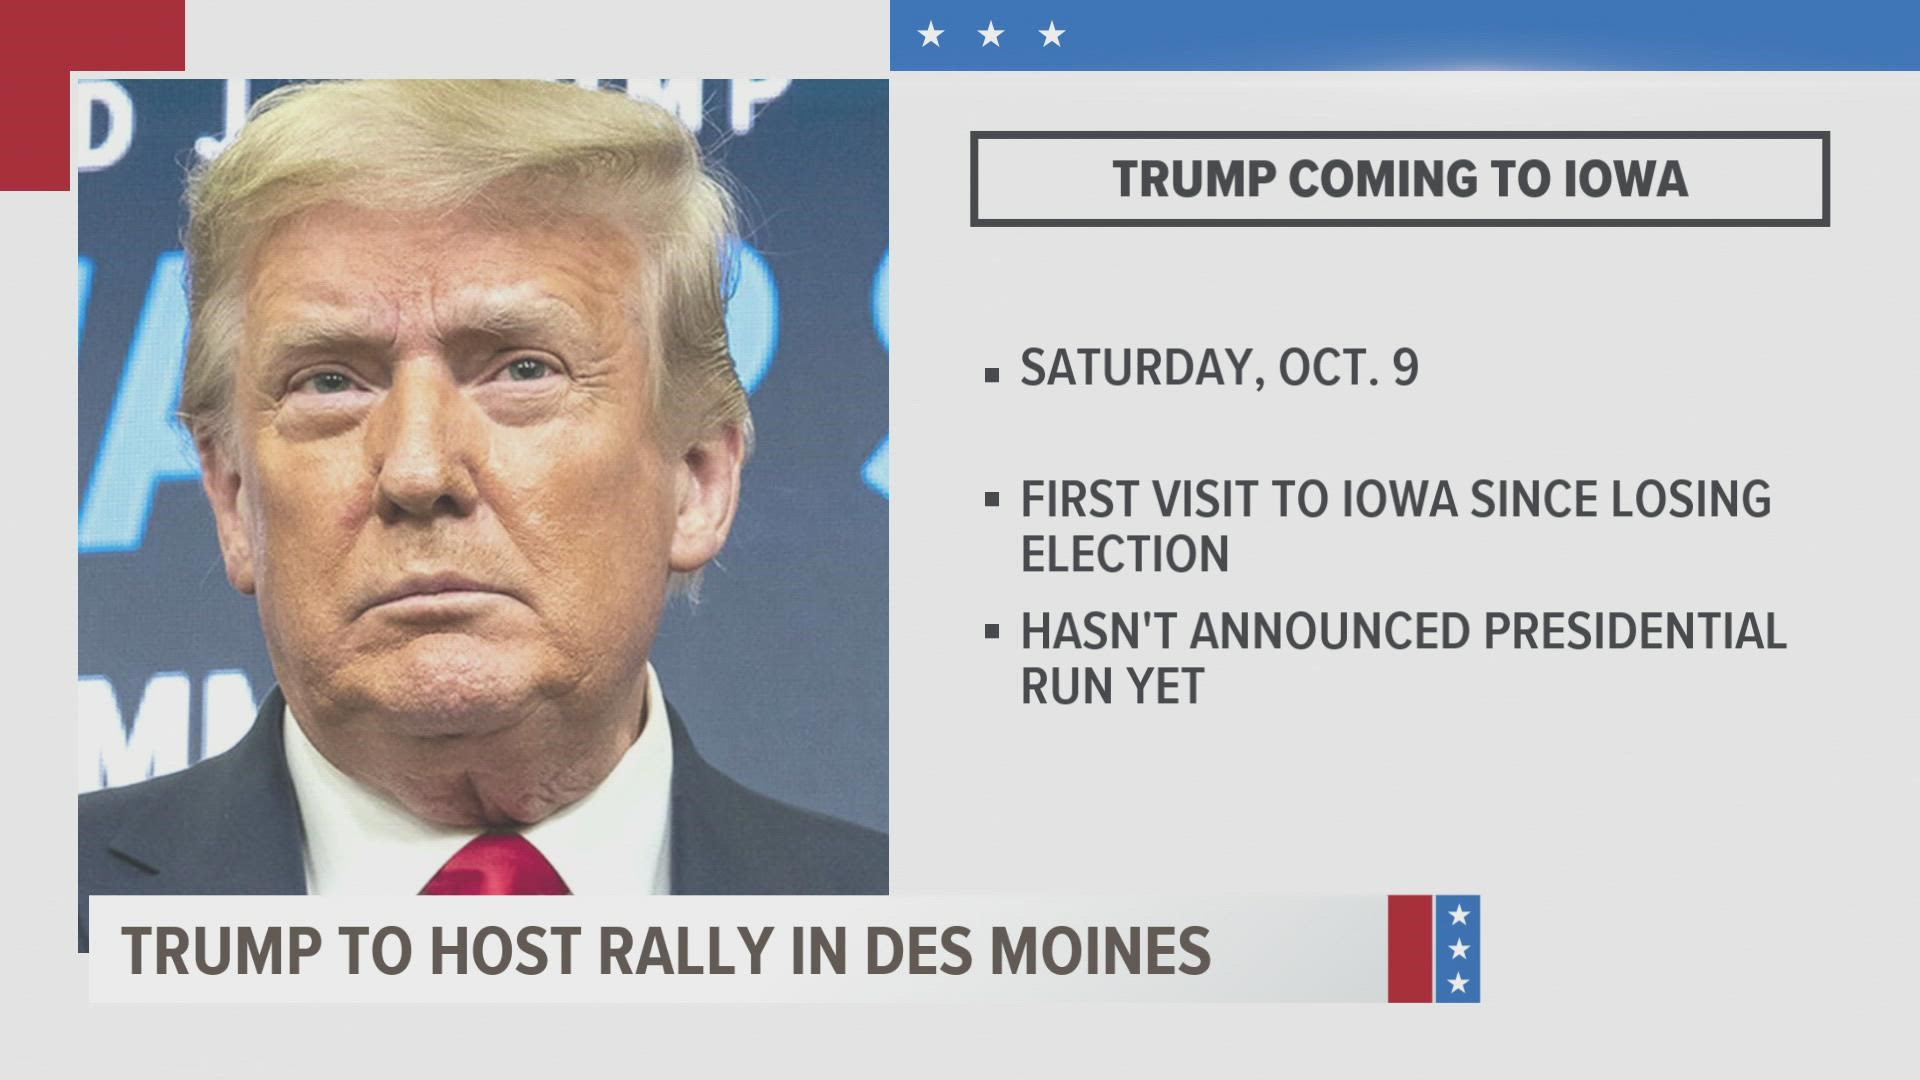 Trump's campaign sent out a release Tuesday night to share information about the rally.